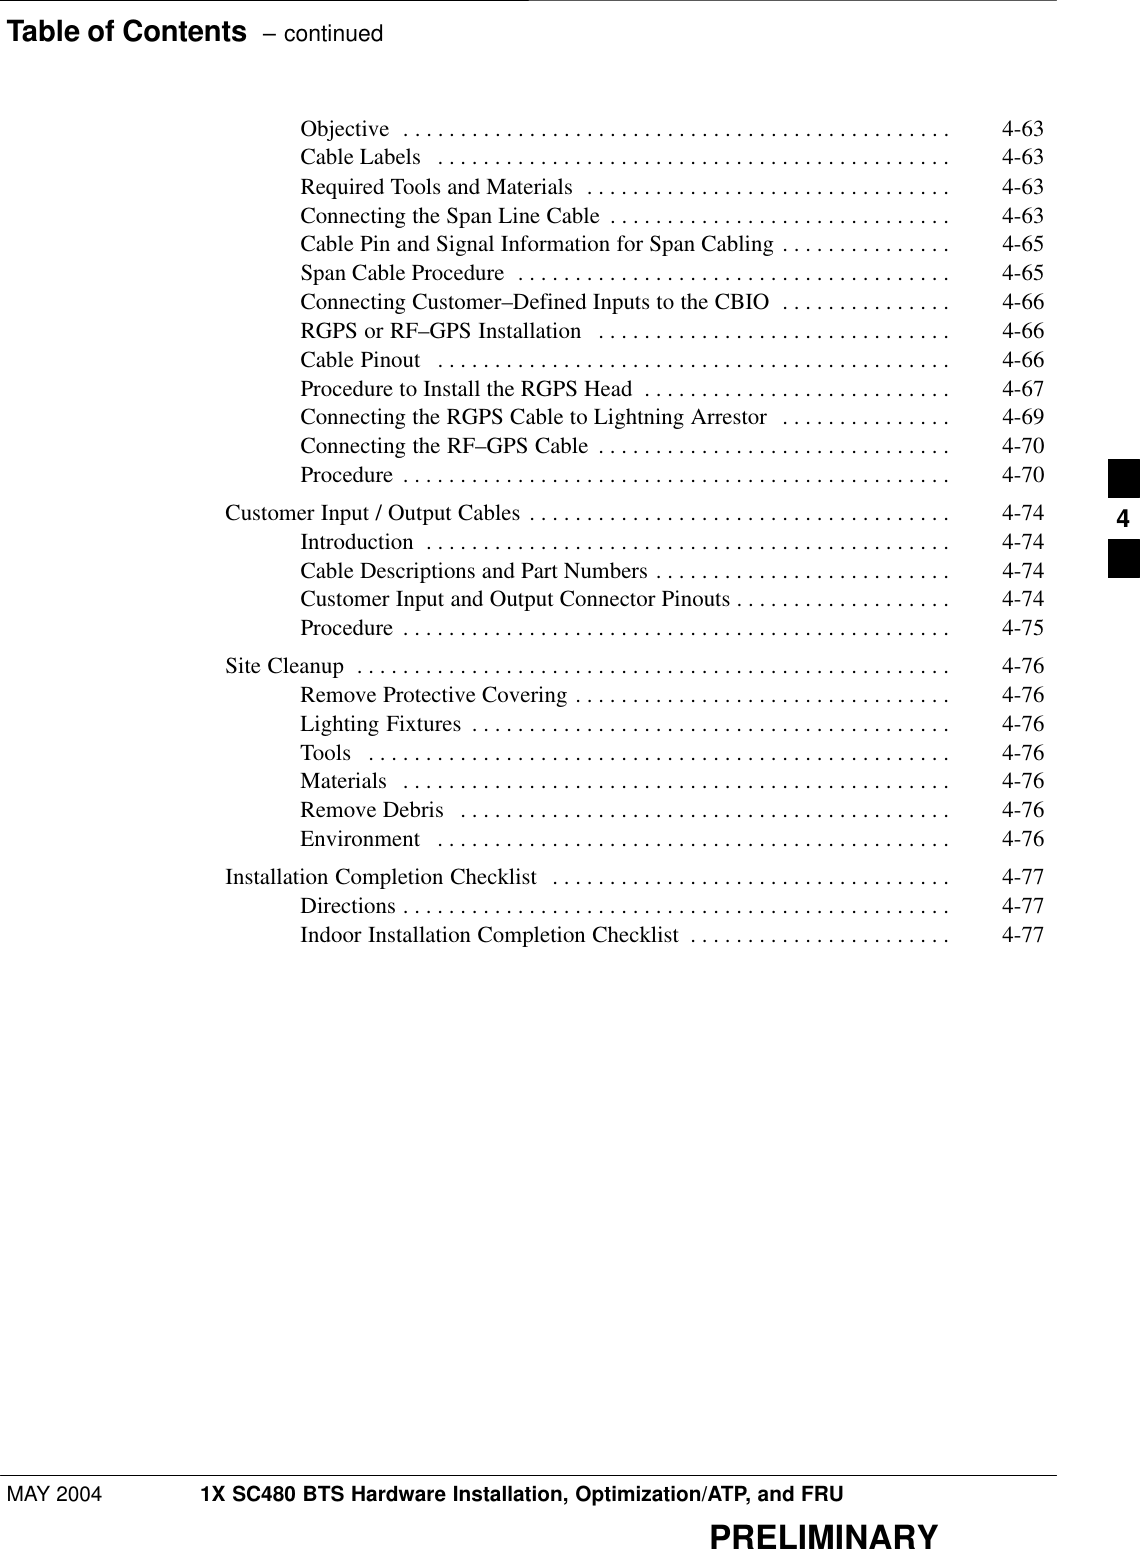 Table of Contents  – continuedMAY 2004 1X SC480 BTS Hardware Installation, Optimization/ATP, and FRUPRELIMINARYObjective 4-63 . . . . . . . . . . . . . . . . . . . . . . . . . . . . . . . . . . . . . . . . . . . . . . . . Cable Labels 4-63 . . . . . . . . . . . . . . . . . . . . . . . . . . . . . . . . . . . . . . . . . . . . . Required Tools and Materials 4-63 . . . . . . . . . . . . . . . . . . . . . . . . . . . . . . . . Connecting the Span Line Cable 4-63 . . . . . . . . . . . . . . . . . . . . . . . . . . . . . . Cable Pin and Signal Information for Span Cabling 4-65 . . . . . . . . . . . . . . . Span Cable Procedure 4-65 . . . . . . . . . . . . . . . . . . . . . . . . . . . . . . . . . . . . . . Connecting Customer–Defined Inputs to the CBIO 4-66 . . . . . . . . . . . . . . . RGPS or RF–GPS Installation 4-66 . . . . . . . . . . . . . . . . . . . . . . . . . . . . . . . Cable Pinout 4-66 . . . . . . . . . . . . . . . . . . . . . . . . . . . . . . . . . . . . . . . . . . . . . Procedure to Install the RGPS Head 4-67 . . . . . . . . . . . . . . . . . . . . . . . . . . . Connecting the RGPS Cable to Lightning Arrestor 4-69 . . . . . . . . . . . . . . . Connecting the RF–GPS Cable 4-70 . . . . . . . . . . . . . . . . . . . . . . . . . . . . . . . Procedure 4-70 . . . . . . . . . . . . . . . . . . . . . . . . . . . . . . . . . . . . . . . . . . . . . . . . Customer Input / Output Cables 4-74 . . . . . . . . . . . . . . . . . . . . . . . . . . . . . . . . . . . . . Introduction 4-74 . . . . . . . . . . . . . . . . . . . . . . . . . . . . . . . . . . . . . . . . . . . . . . Cable Descriptions and Part Numbers 4-74 . . . . . . . . . . . . . . . . . . . . . . . . . . Customer Input and Output Connector Pinouts 4-74 . . . . . . . . . . . . . . . . . . . Procedure 4-75 . . . . . . . . . . . . . . . . . . . . . . . . . . . . . . . . . . . . . . . . . . . . . . . . Site Cleanup 4-76 . . . . . . . . . . . . . . . . . . . . . . . . . . . . . . . . . . . . . . . . . . . . . . . . . . . . Remove Protective Covering 4-76 . . . . . . . . . . . . . . . . . . . . . . . . . . . . . . . . . Lighting Fixtures 4-76 . . . . . . . . . . . . . . . . . . . . . . . . . . . . . . . . . . . . . . . . . . Tools 4-76 . . . . . . . . . . . . . . . . . . . . . . . . . . . . . . . . . . . . . . . . . . . . . . . . . . . Materials 4-76 . . . . . . . . . . . . . . . . . . . . . . . . . . . . . . . . . . . . . . . . . . . . . . . . Remove Debris 4-76 . . . . . . . . . . . . . . . . . . . . . . . . . . . . . . . . . . . . . . . . . . . Environment 4-76 . . . . . . . . . . . . . . . . . . . . . . . . . . . . . . . . . . . . . . . . . . . . . Installation Completion Checklist 4-77 . . . . . . . . . . . . . . . . . . . . . . . . . . . . . . . . . . . Directions 4-77 . . . . . . . . . . . . . . . . . . . . . . . . . . . . . . . . . . . . . . . . . . . . . . . . Indoor Installation Completion Checklist 4-77 . . . . . . . . . . . . . . . . . . . . . . . 4